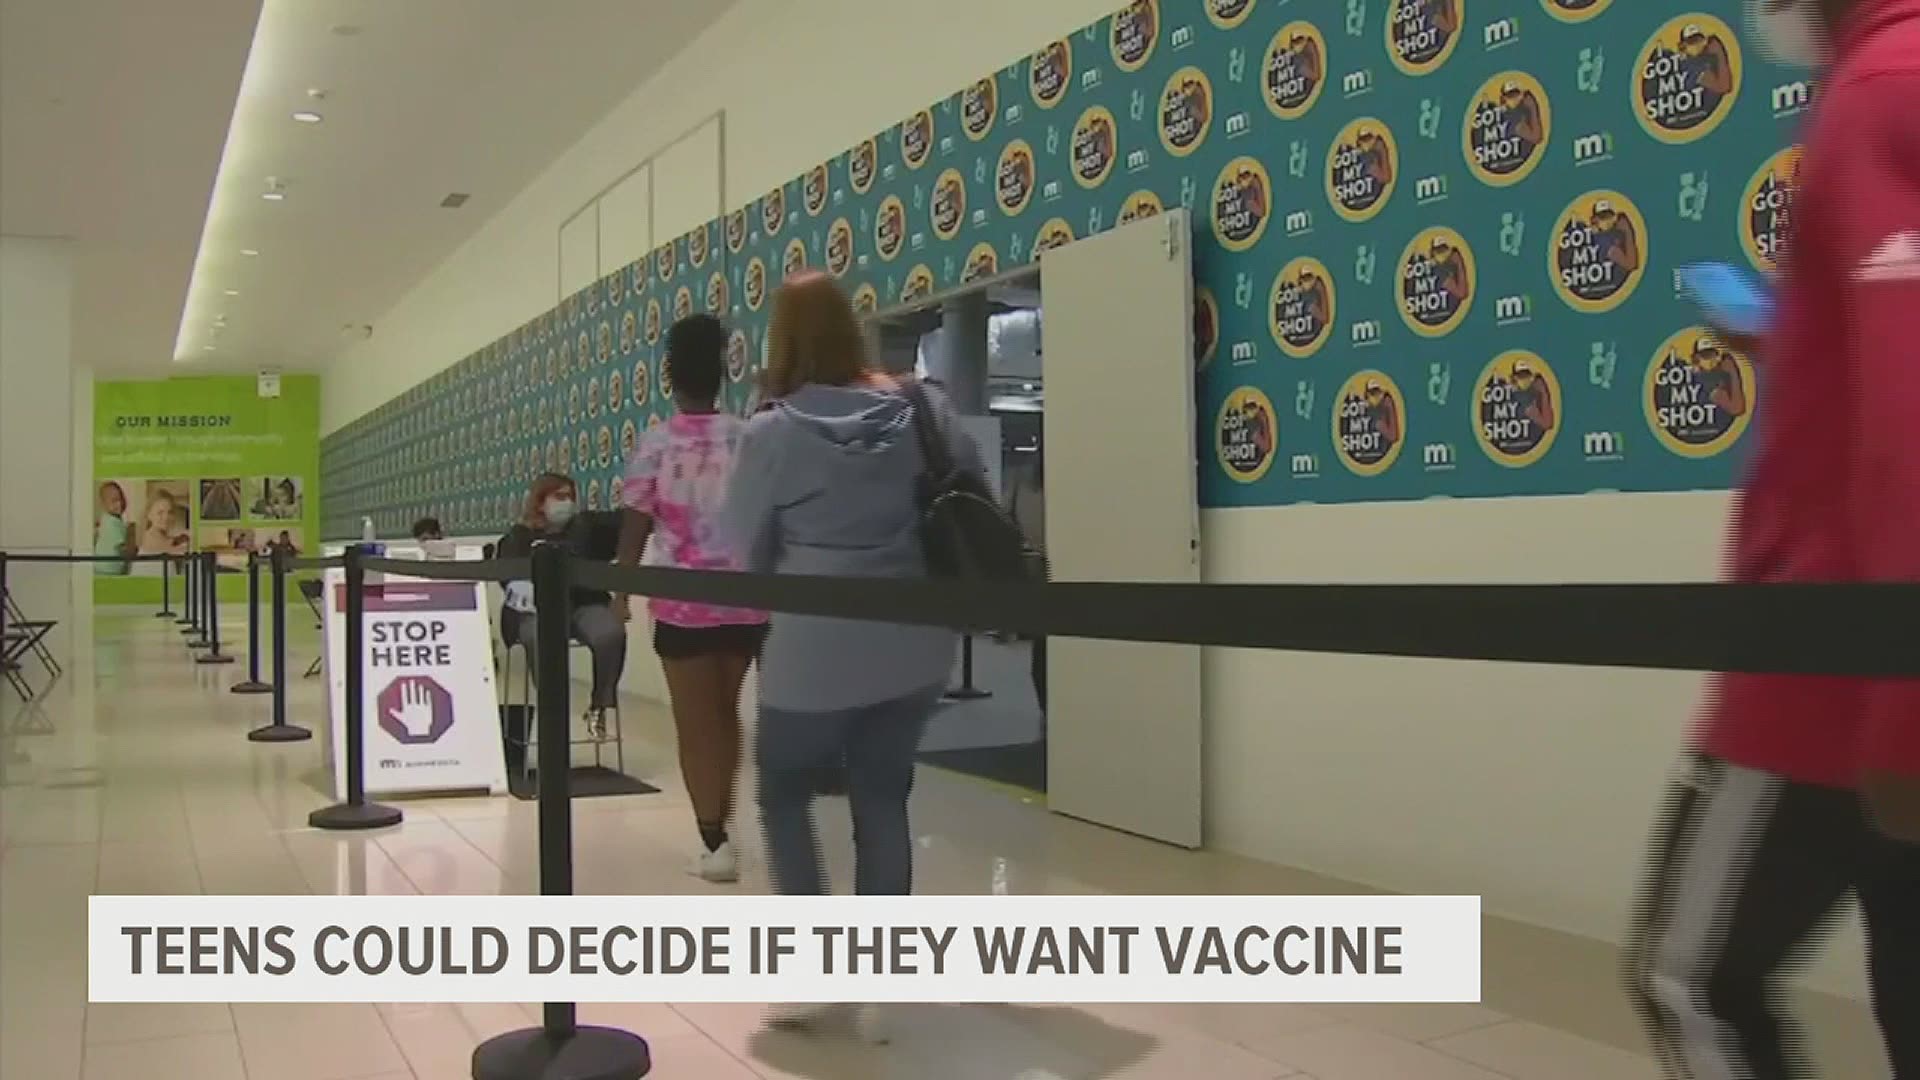 Philadelphia State Senator Amanda Cappelletti wants to introduce a bill that would give teens 14 to 17 the ability to decide if they want the COVID-19 vaccine.